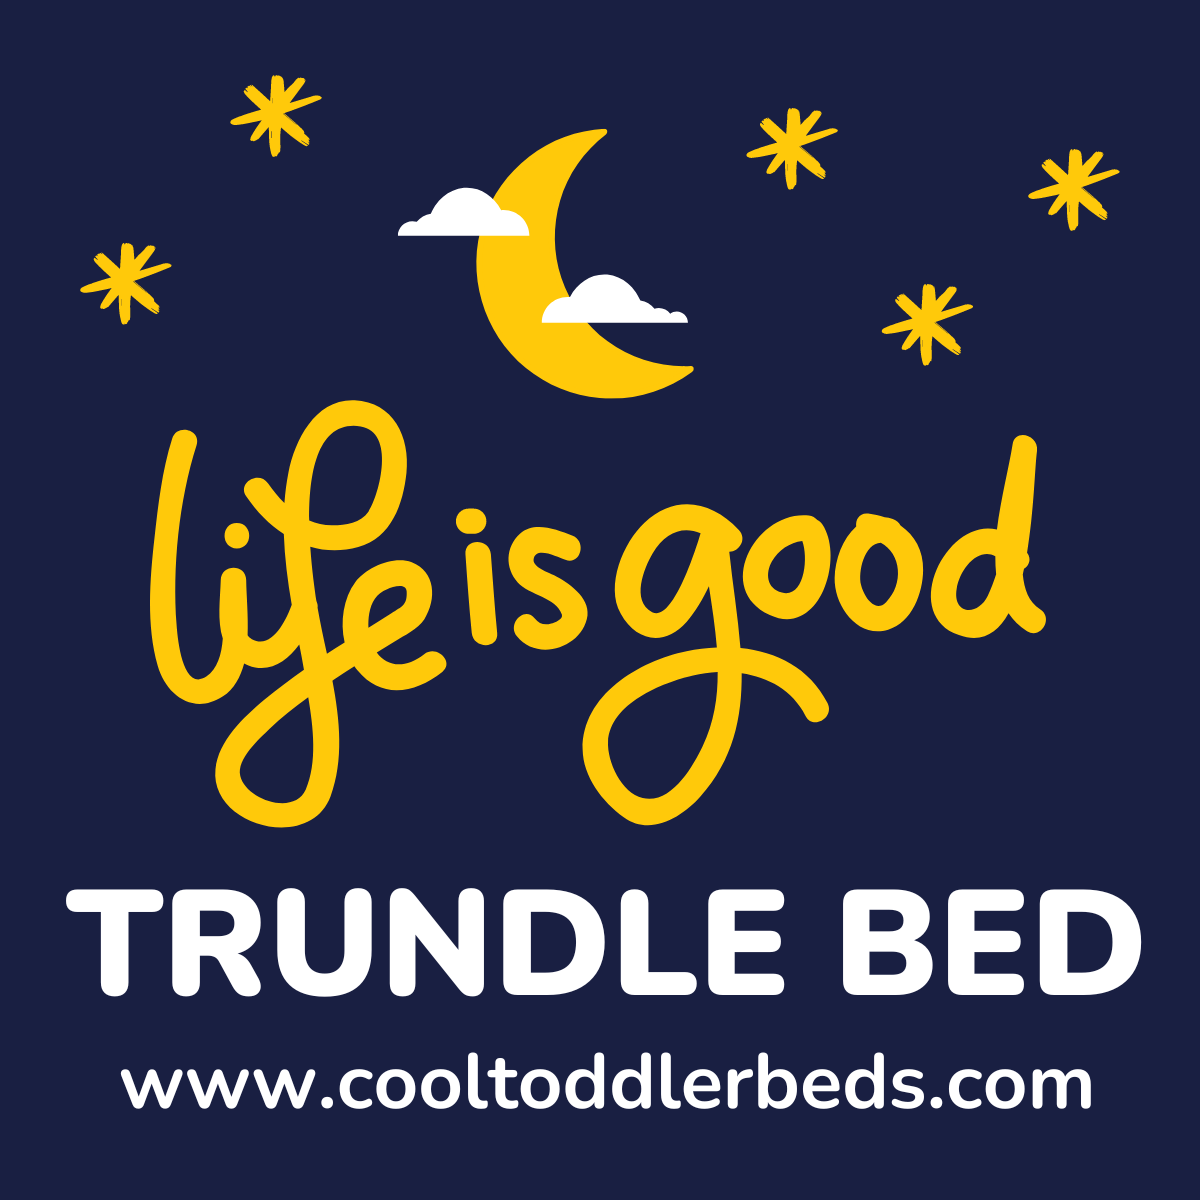 How To Fit Full Size Mattress Into A Trundle Bed?